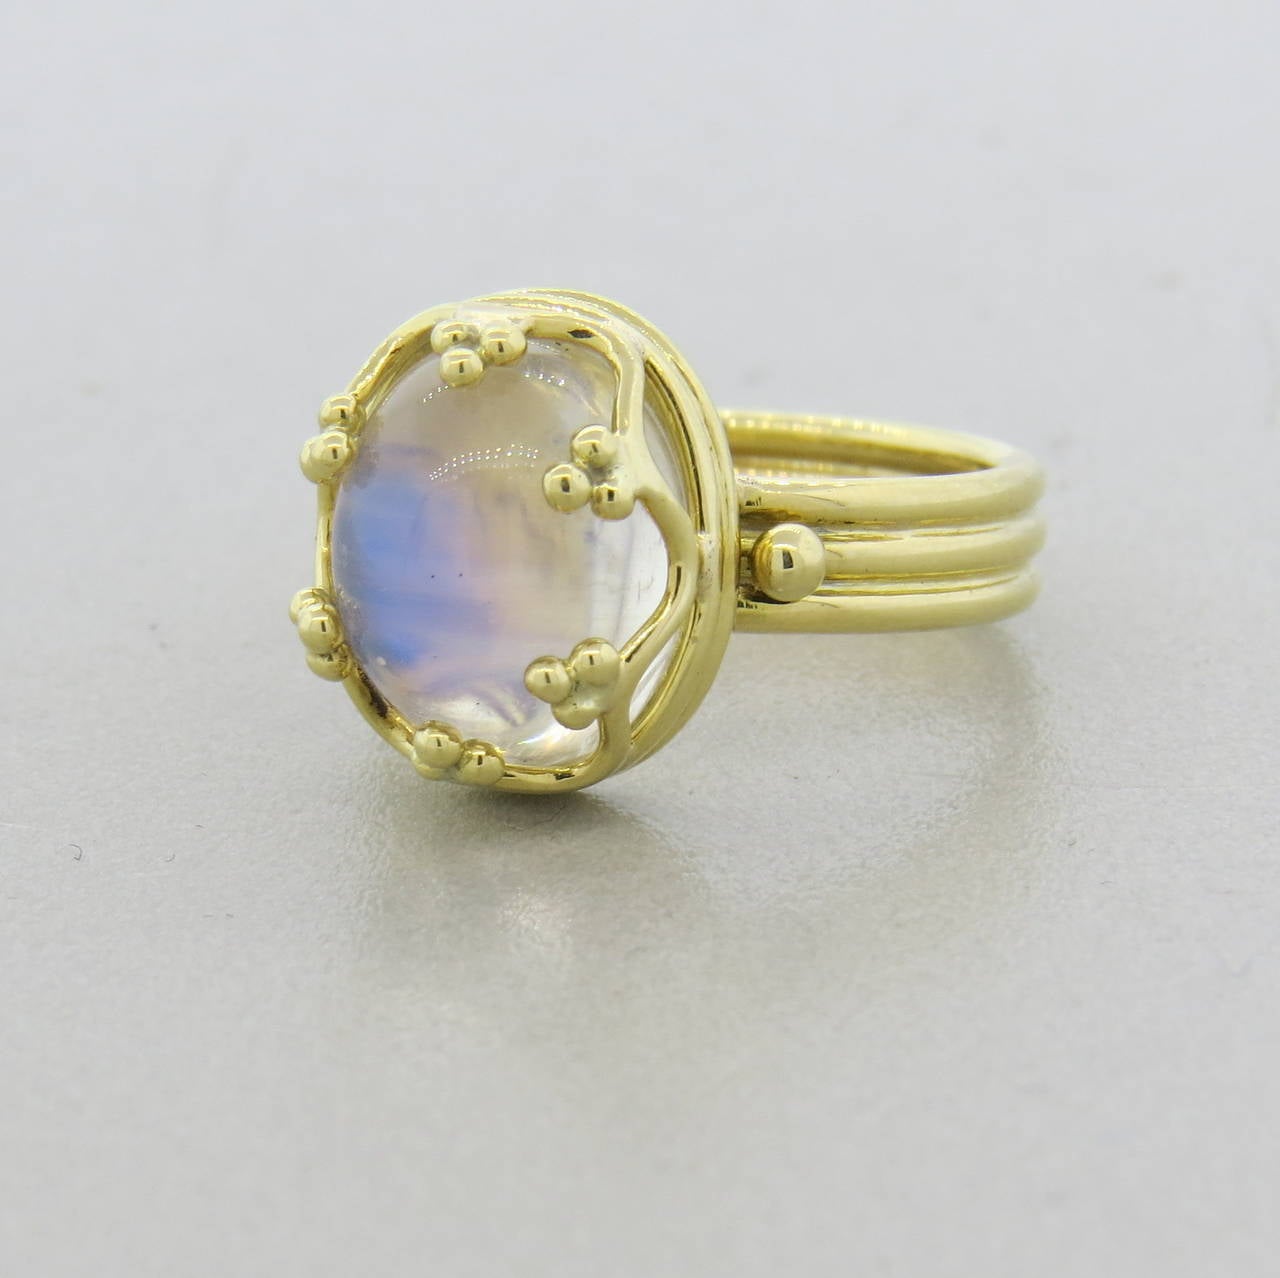 Temple St. Clair 18k gold ring, featuring oval 6ct moonstone cabochon. Ring is a size 6 1/2, ring of the ring measures 14mm x 11.5mm. Marked with Temple hallmark and 750. Weight of the piece - 7.8 grams.